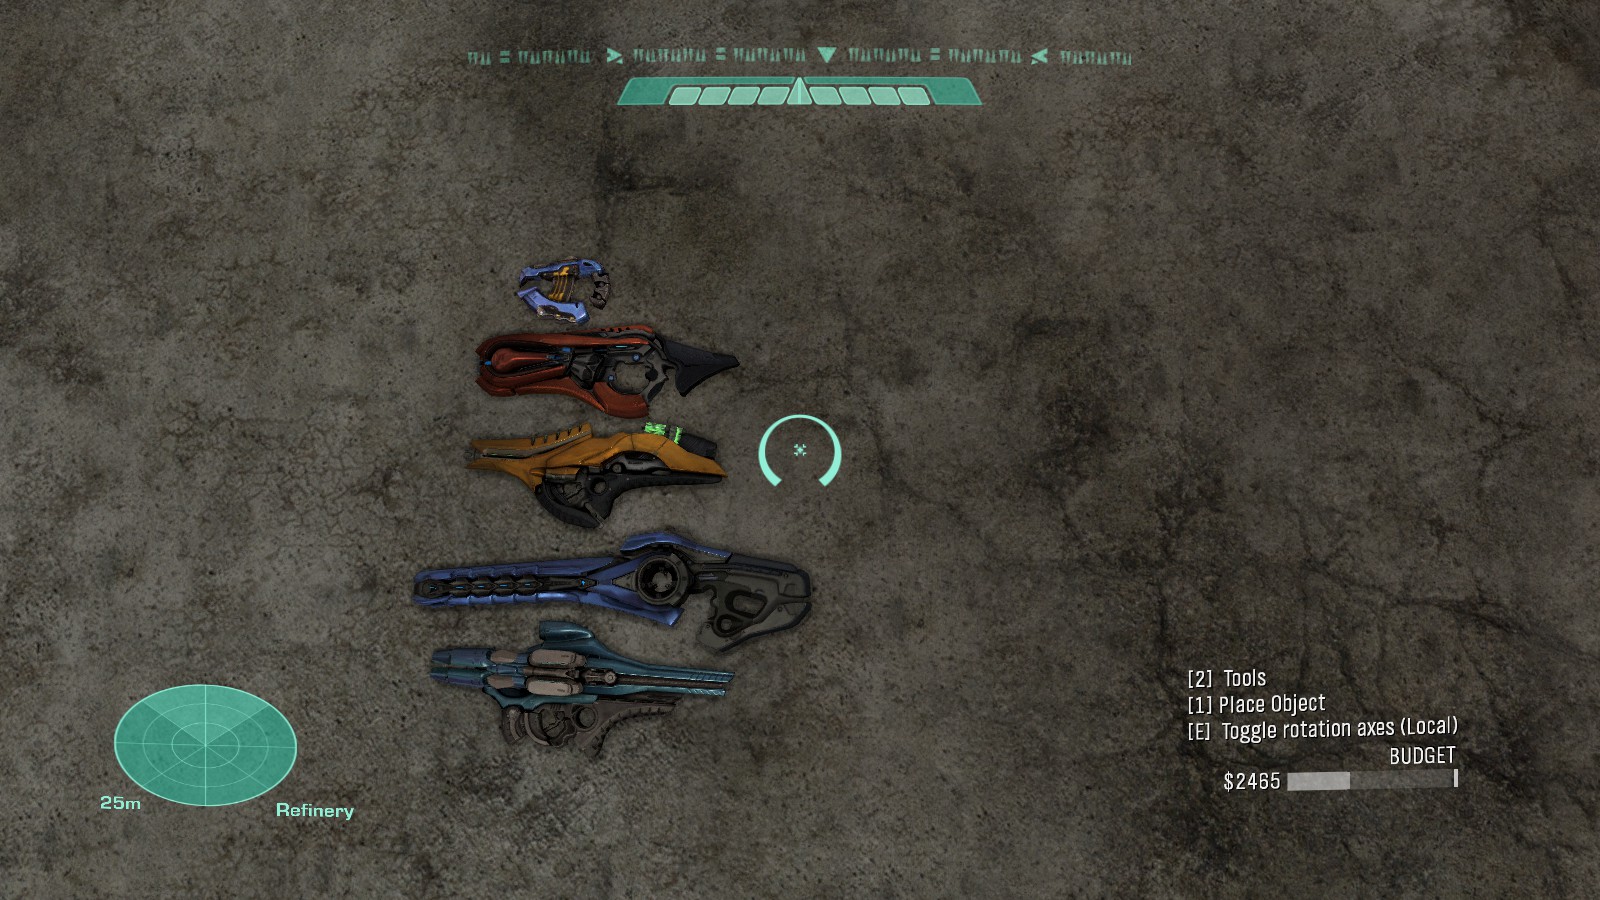 Halo: The Master Chief Collection Basic Guide for Vehicles Fight in Halo Reach